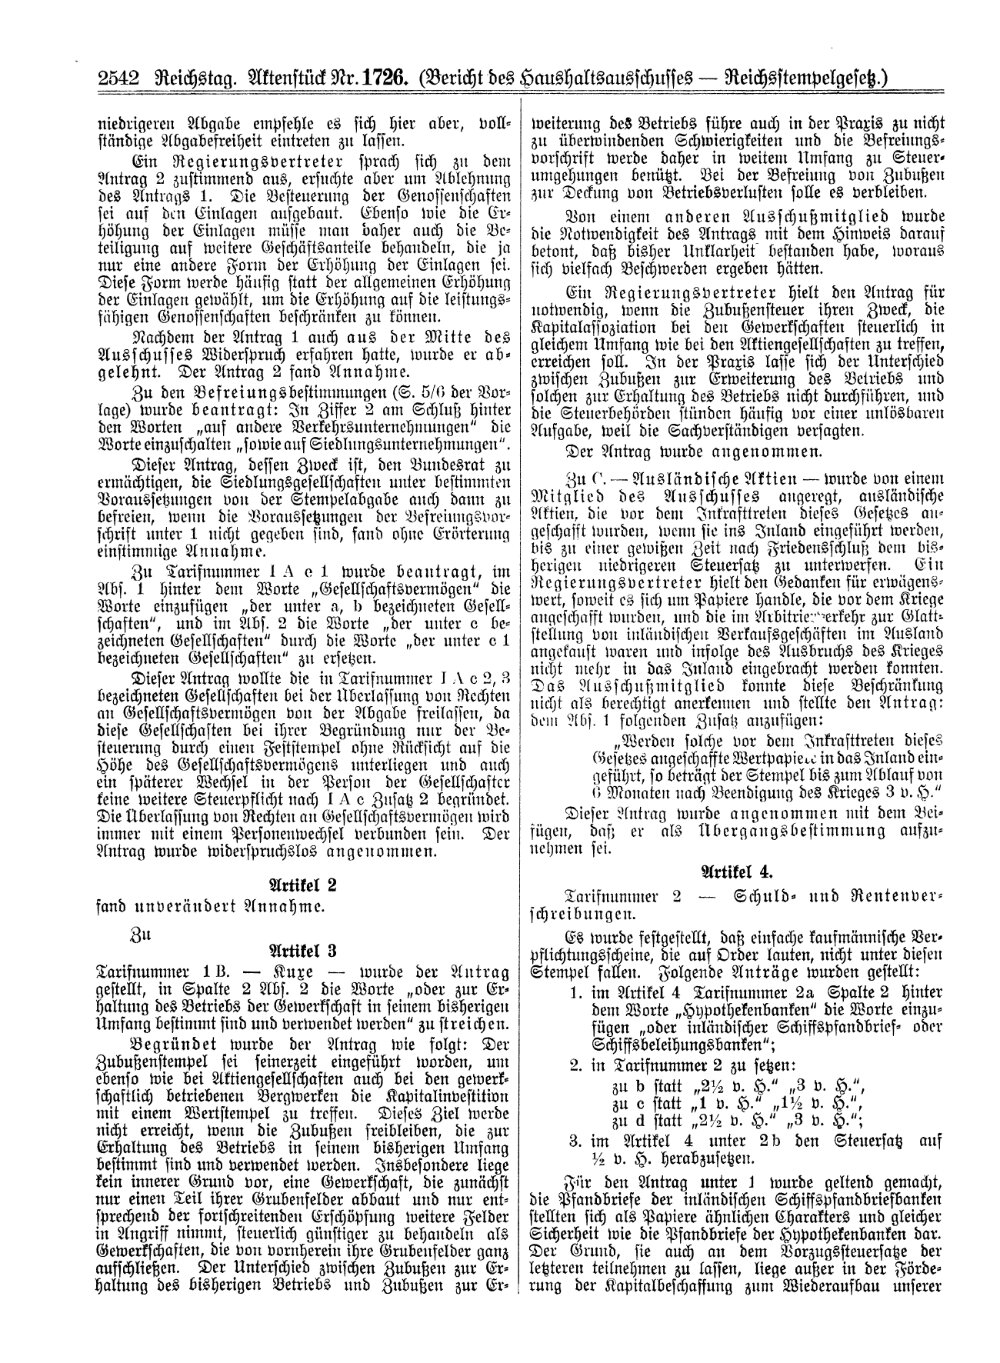 Scan of page 2542